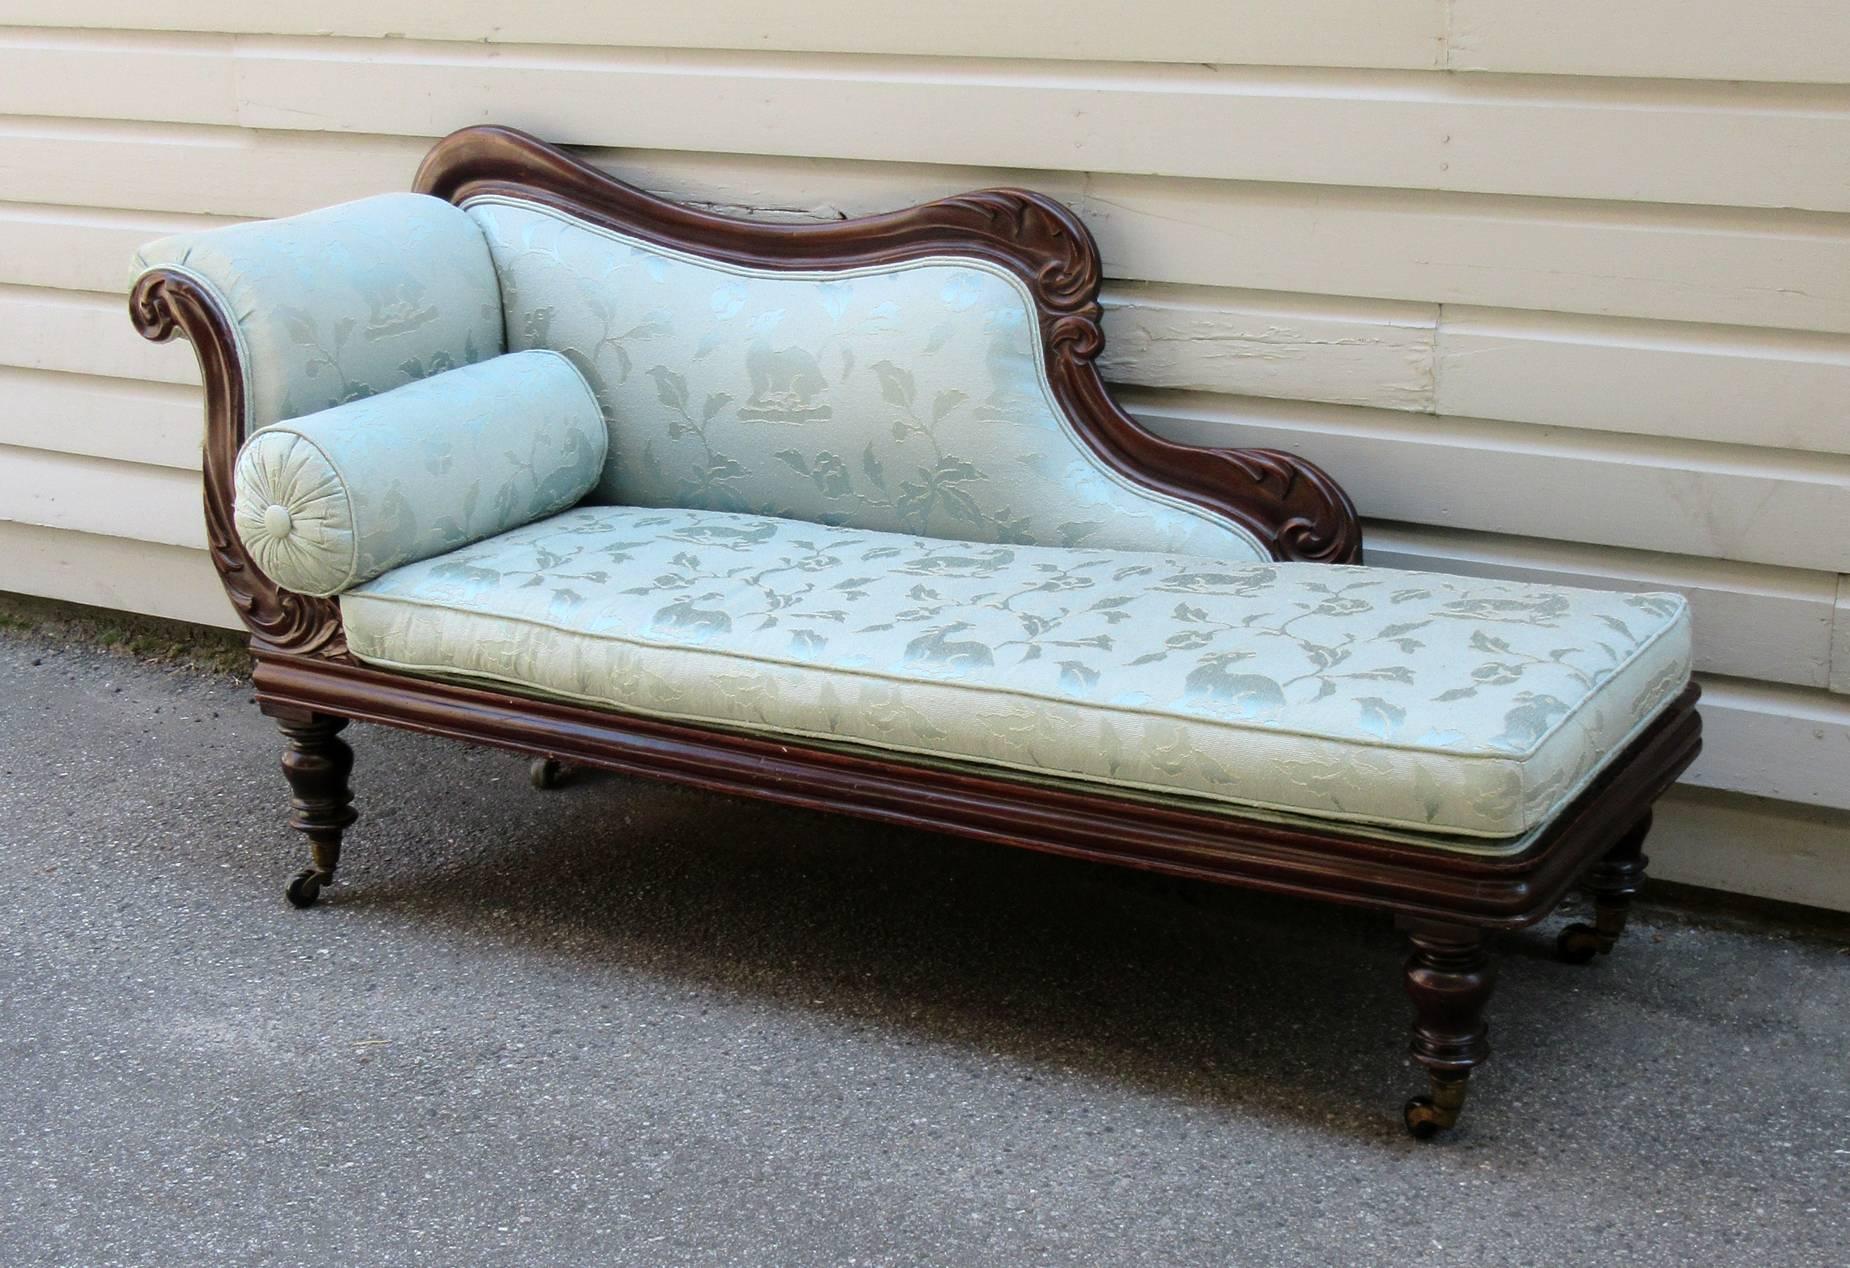 Upholstery 19th Century West Indies Jamaican Regency Mahogany Upholstered Recamier